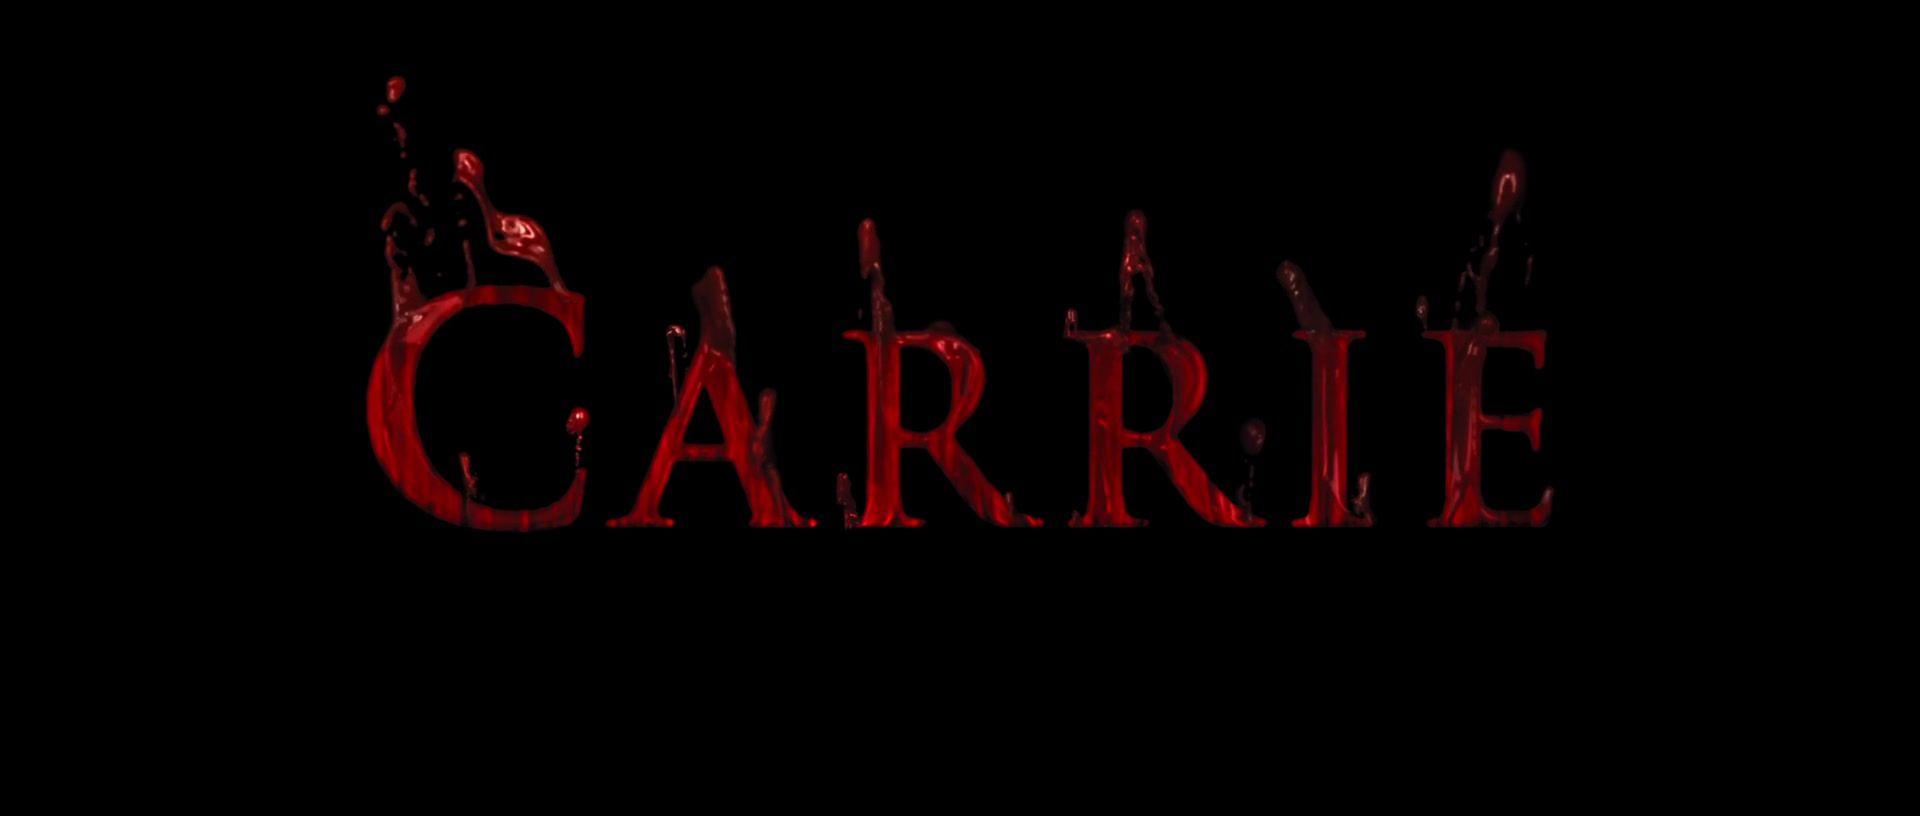 Carrie Logo - Carrie (2013). Film and Television